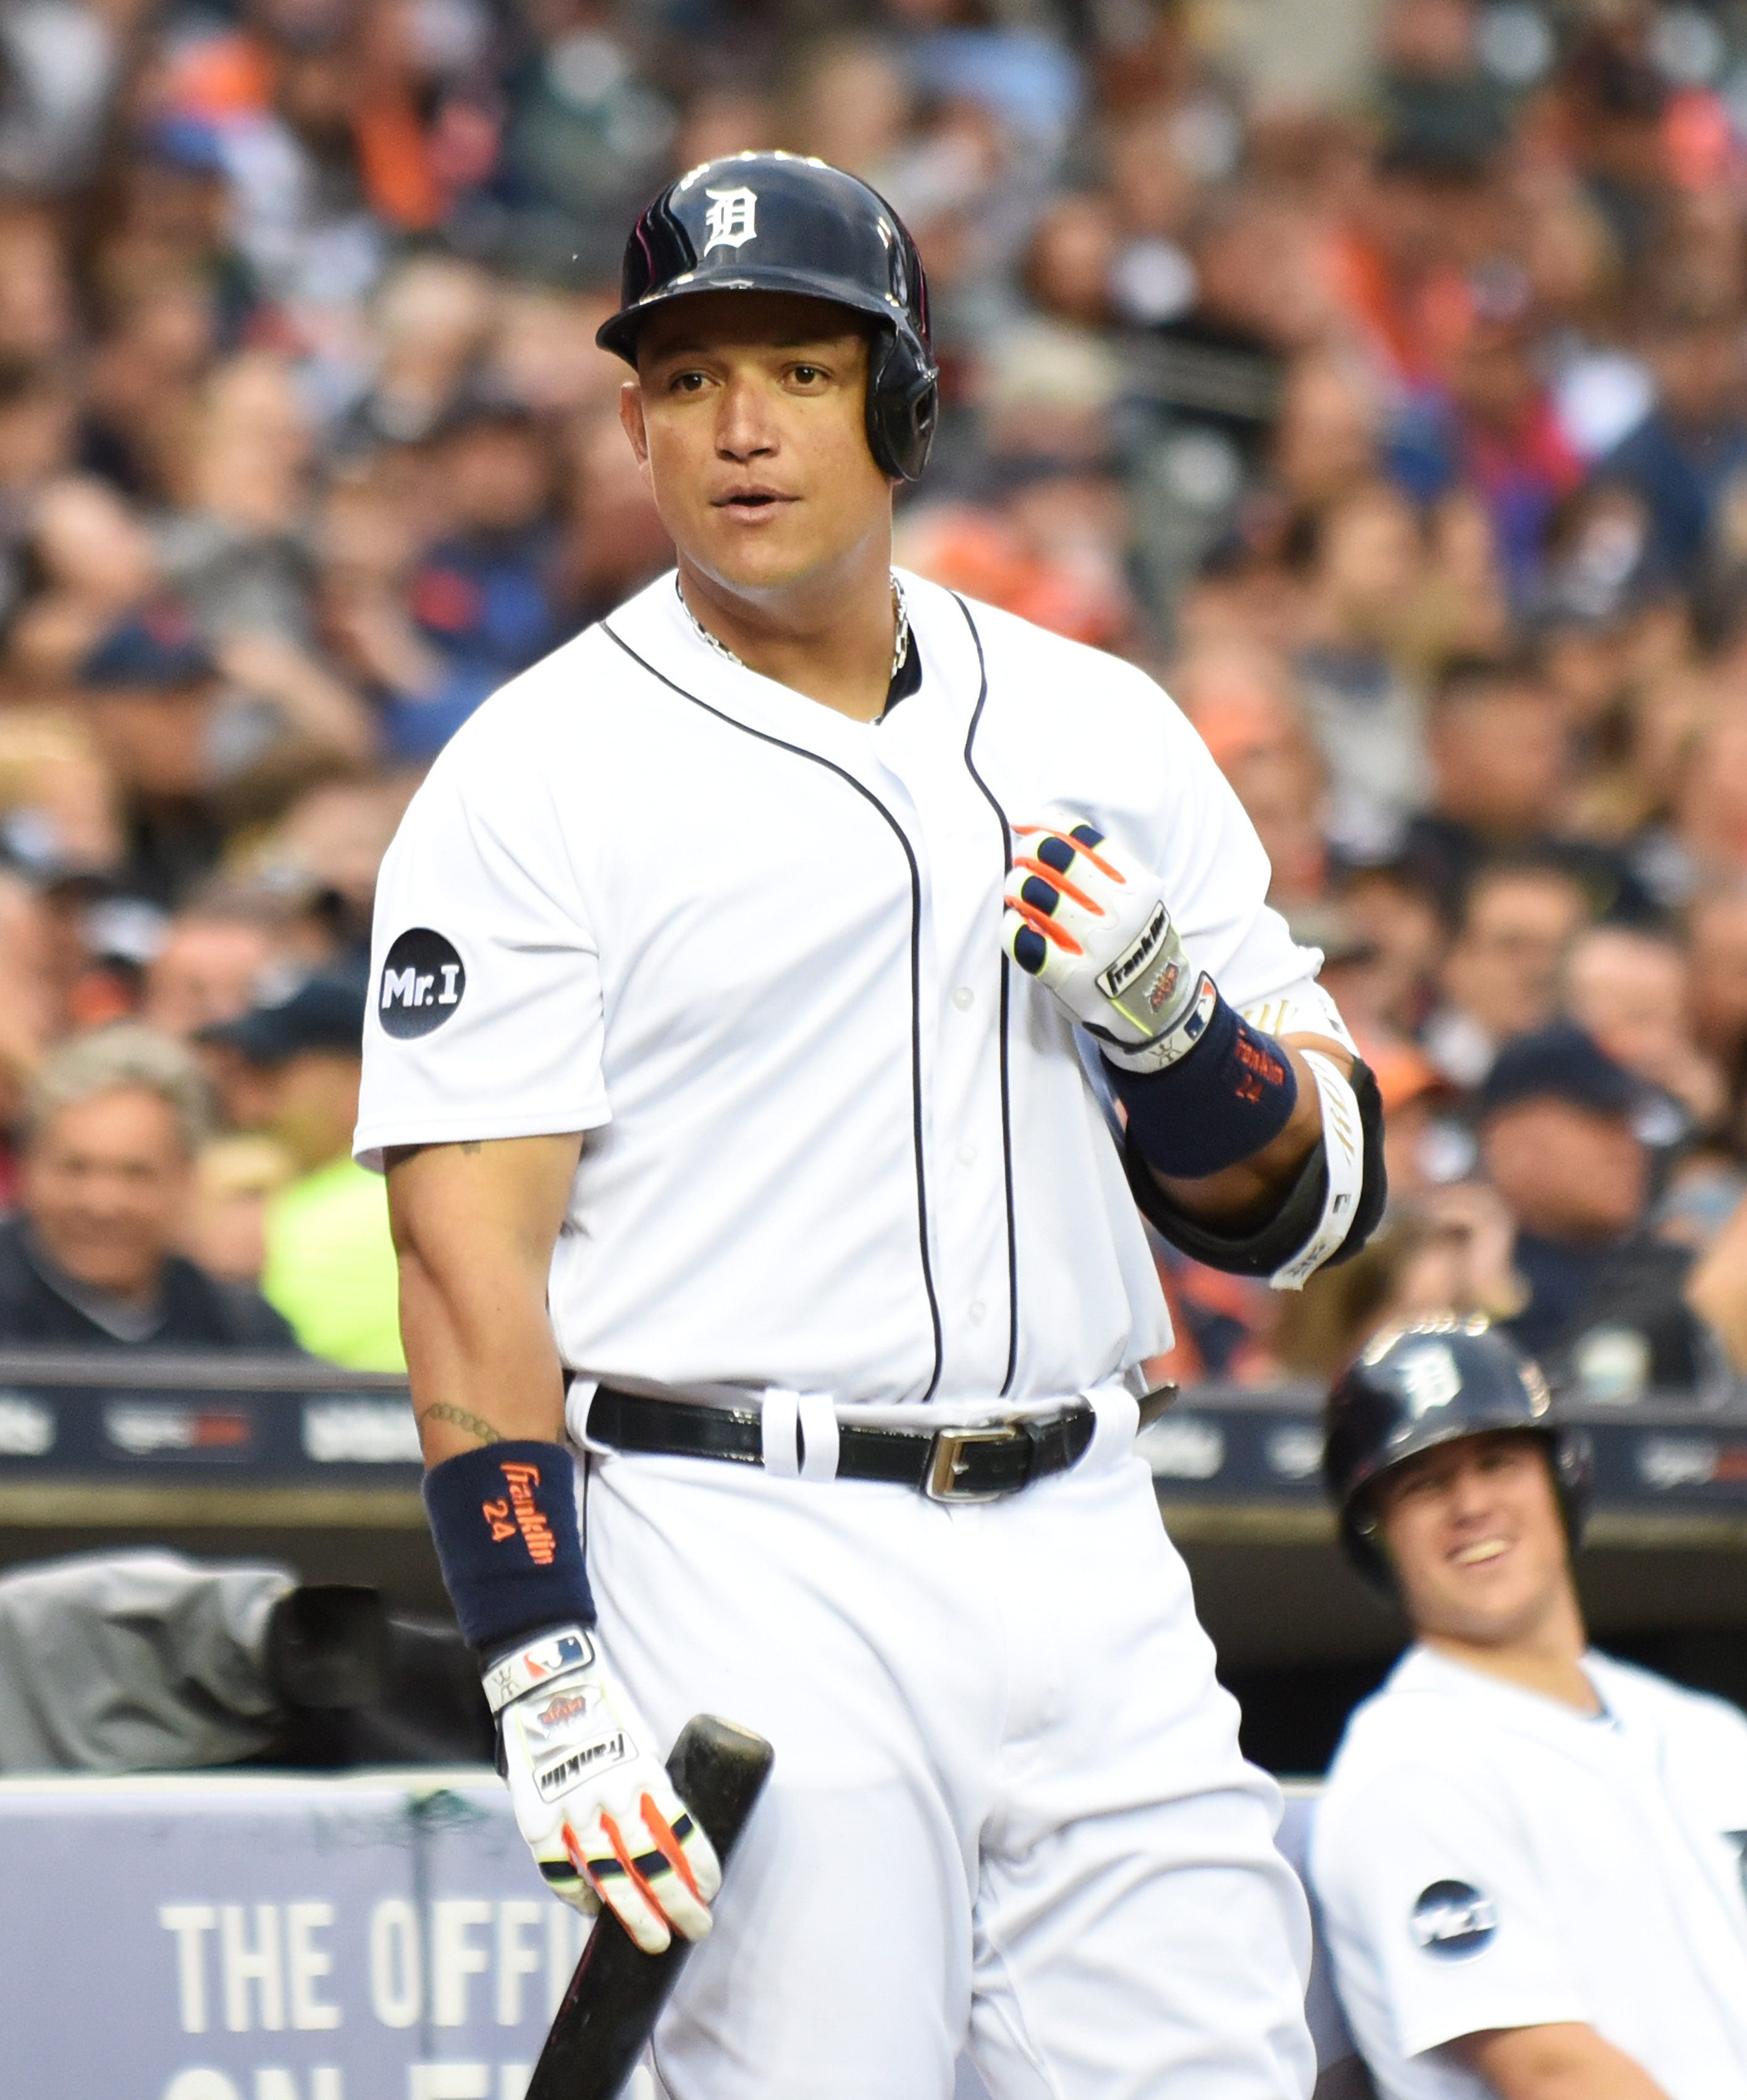 A lengthy legal and financial spat between Tigers superstar Miguel Cabrera and his former Florida mistress has been resolved, with Cabrera ordered to pay $20,000 per month in child and family support, plus significant extras.